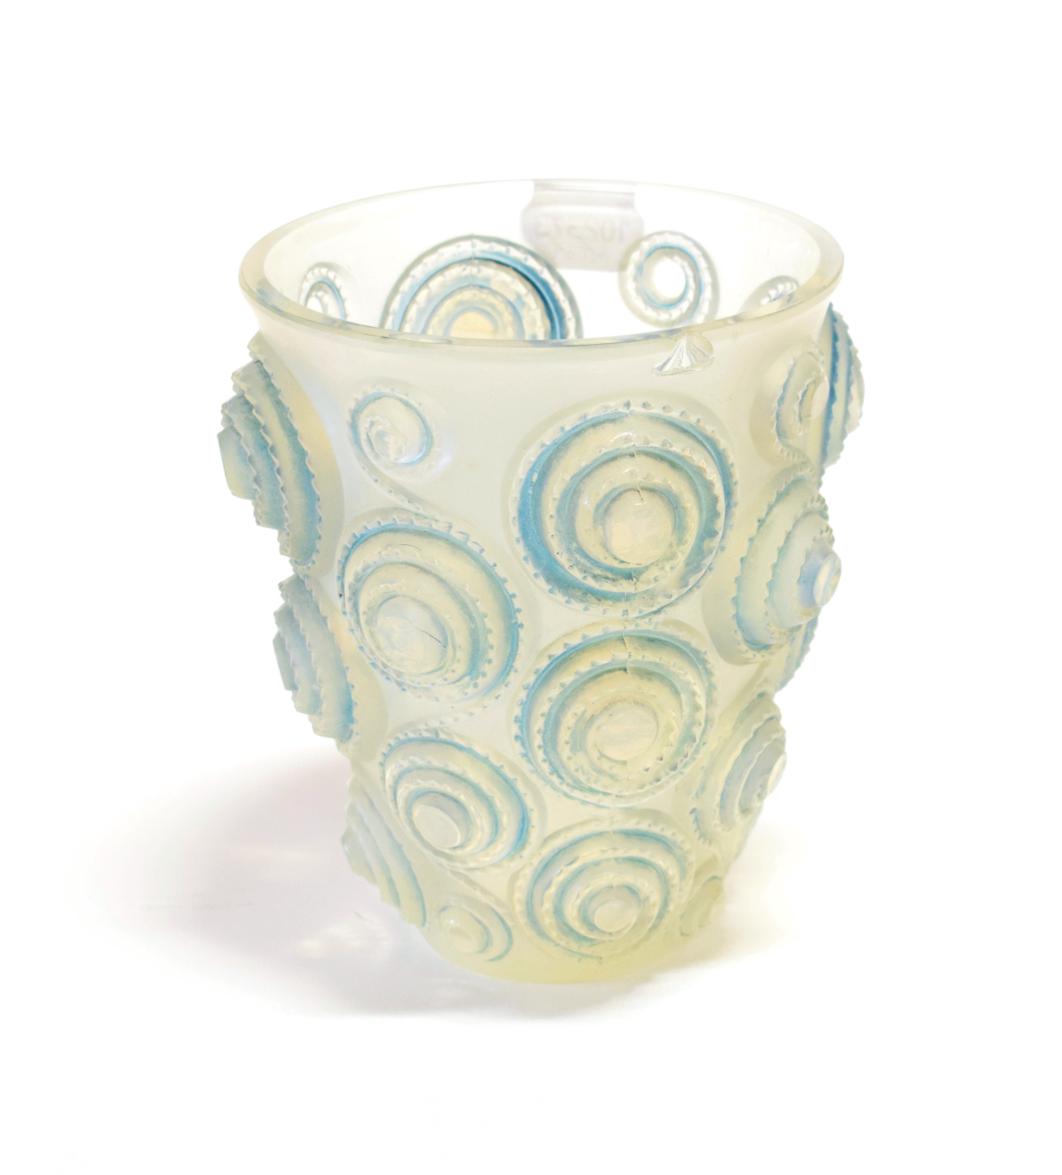 Lot 3544 - René Lalique (French, 1860-1945): An Opalescent, Frosted and Blue Stained Glass Spirales Vase,...